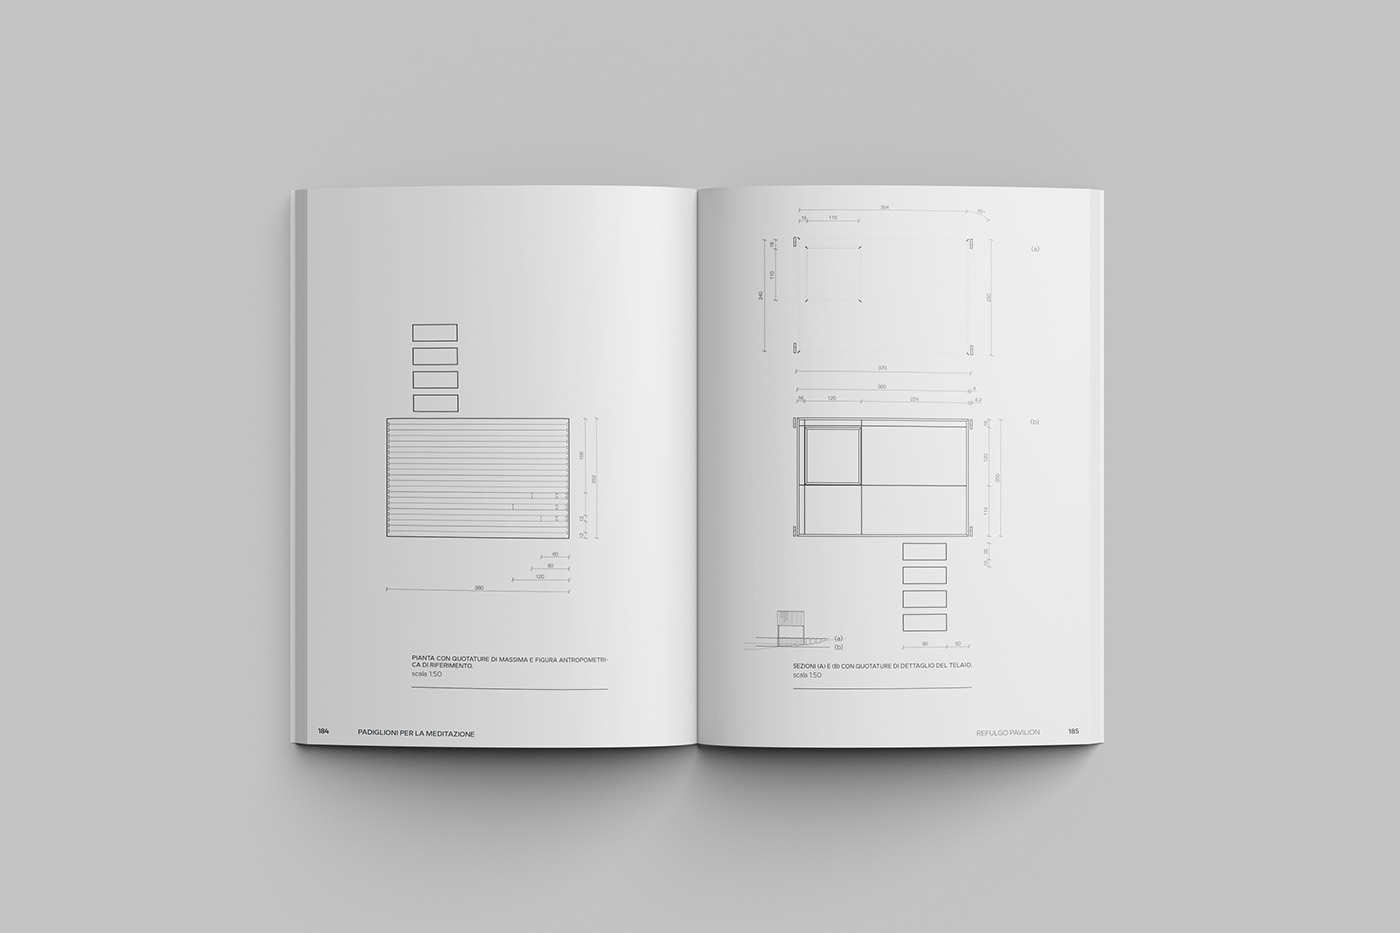 architecture art direction  book design editorial Editorial Illustration product design  typography  